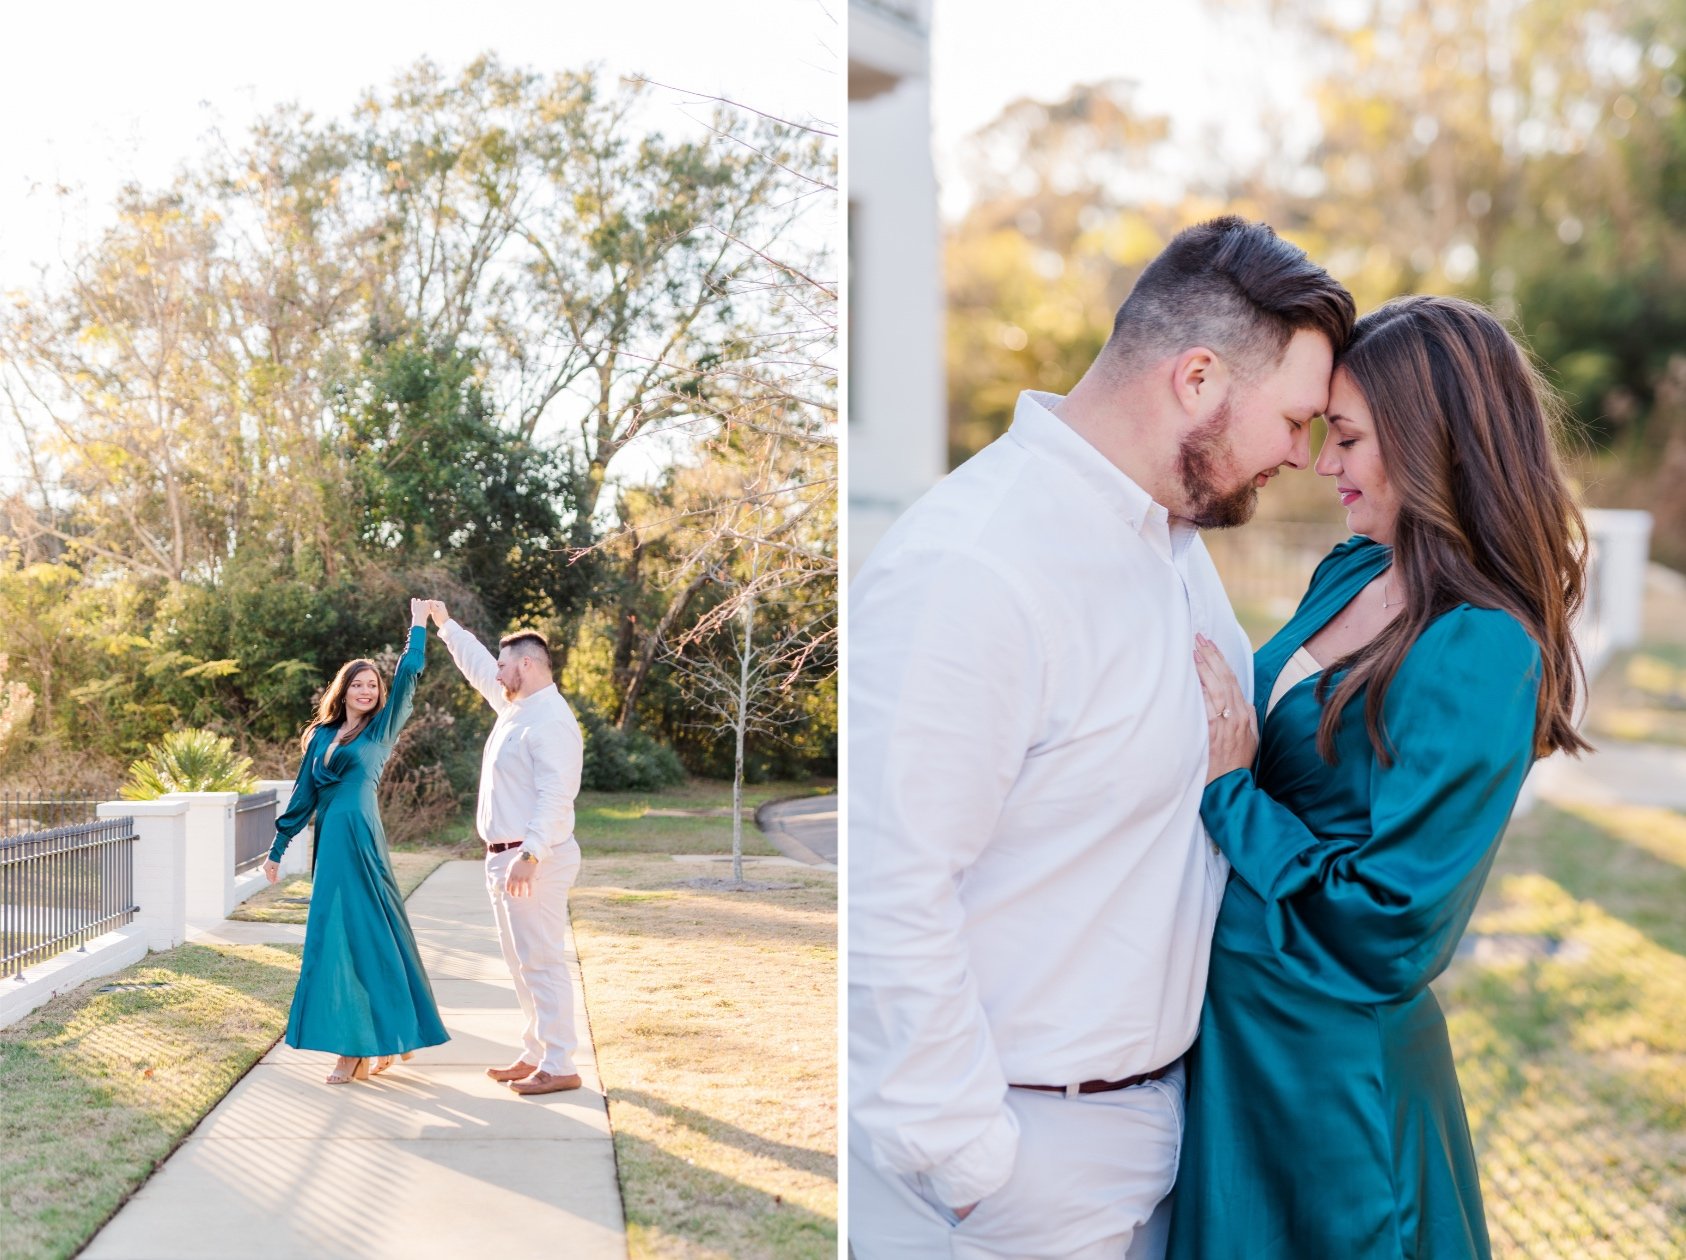 Fairhope Alabama Engagement Session | Fairhope Pier and Downtown Fairhope | Photographed by Kristen Marcus Photography